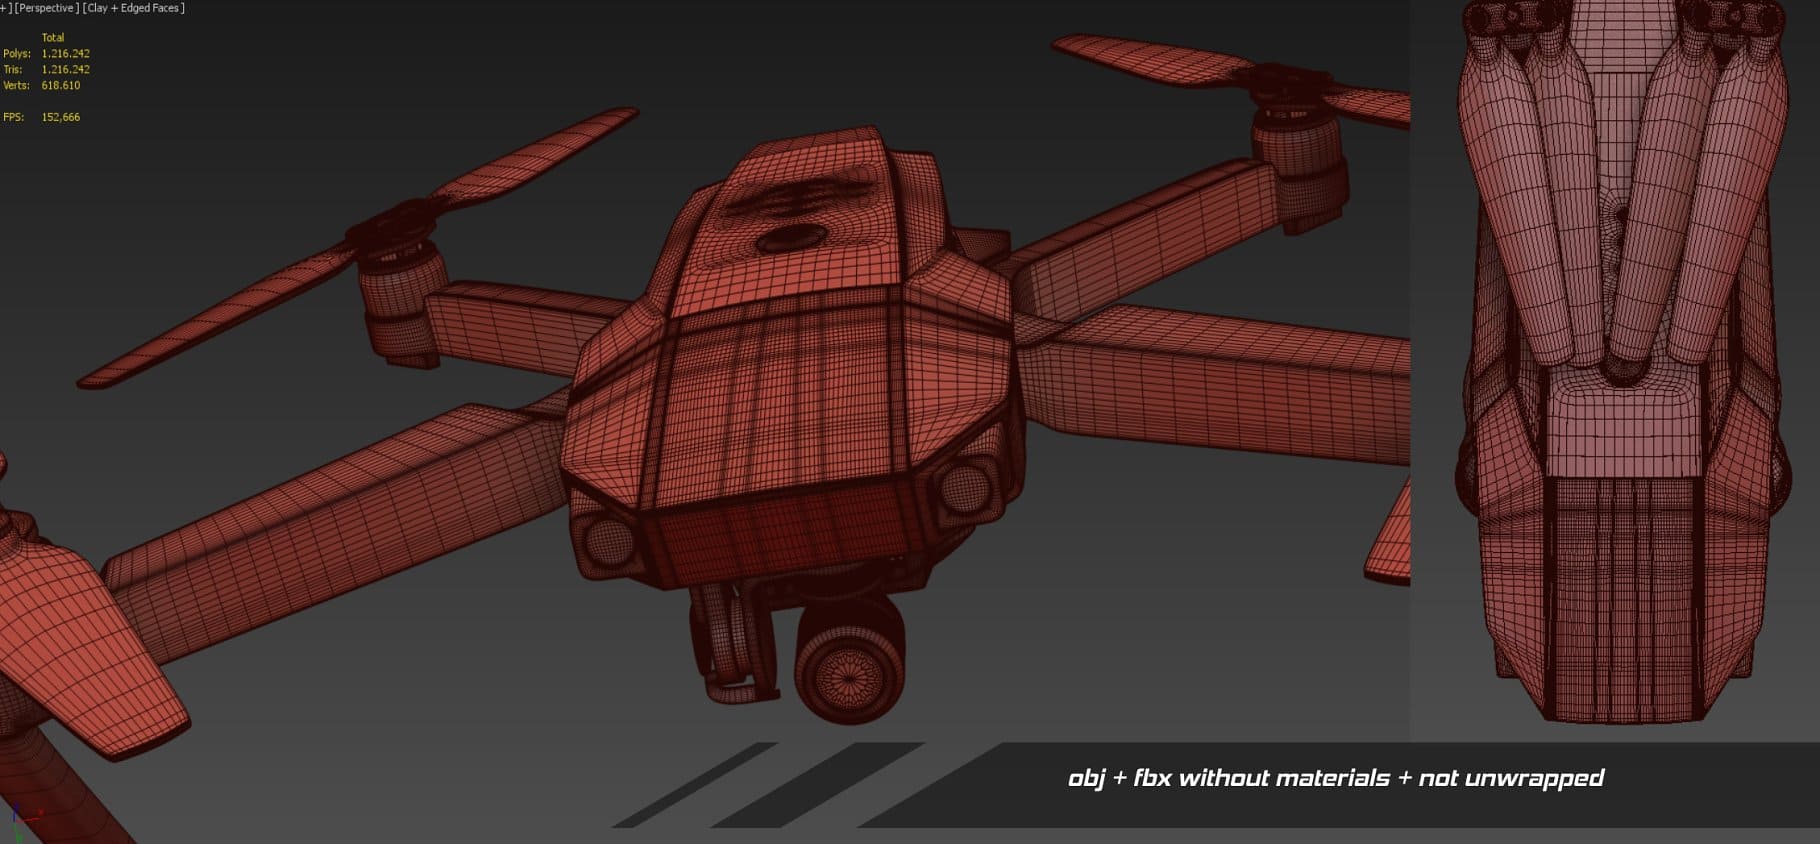 Red 3d model of a folded and flying Dji mavic pro quadcopter.